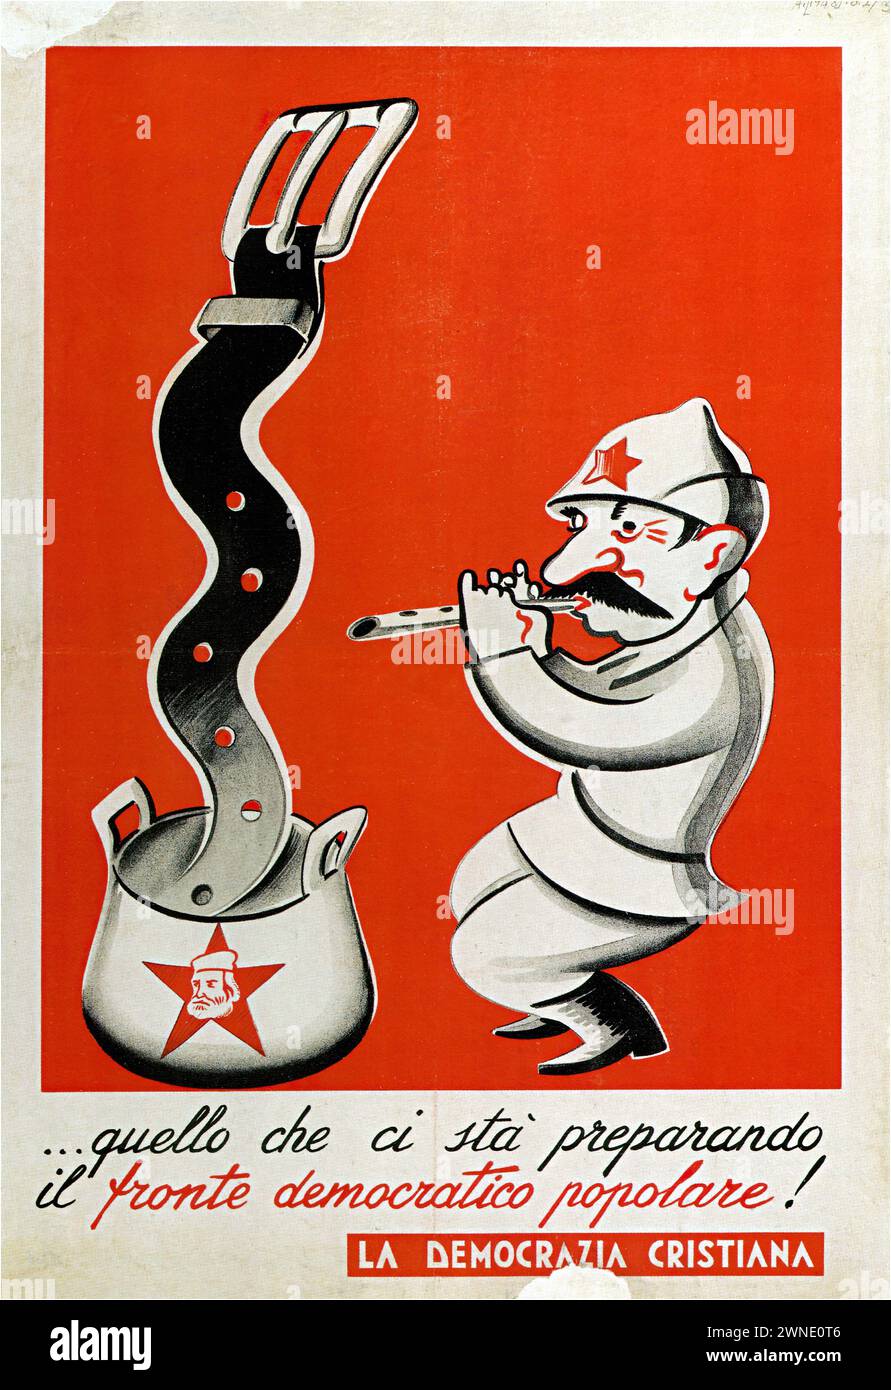 '...quello che ci sta preparando il fronte democratico popolare! LA DEMOCRAZIA CRISTIANA' ['...what the popular democratic front is preparing for us! CHRISTIAN DEMOCRACY'] Vintage Italian Advertising depicting a caricatured figure blowing into a teapot with a star and a caricature of a man on it, symbolizing political messaging. The style is satirical and employs a strong, simple color contrast. Stock Photo